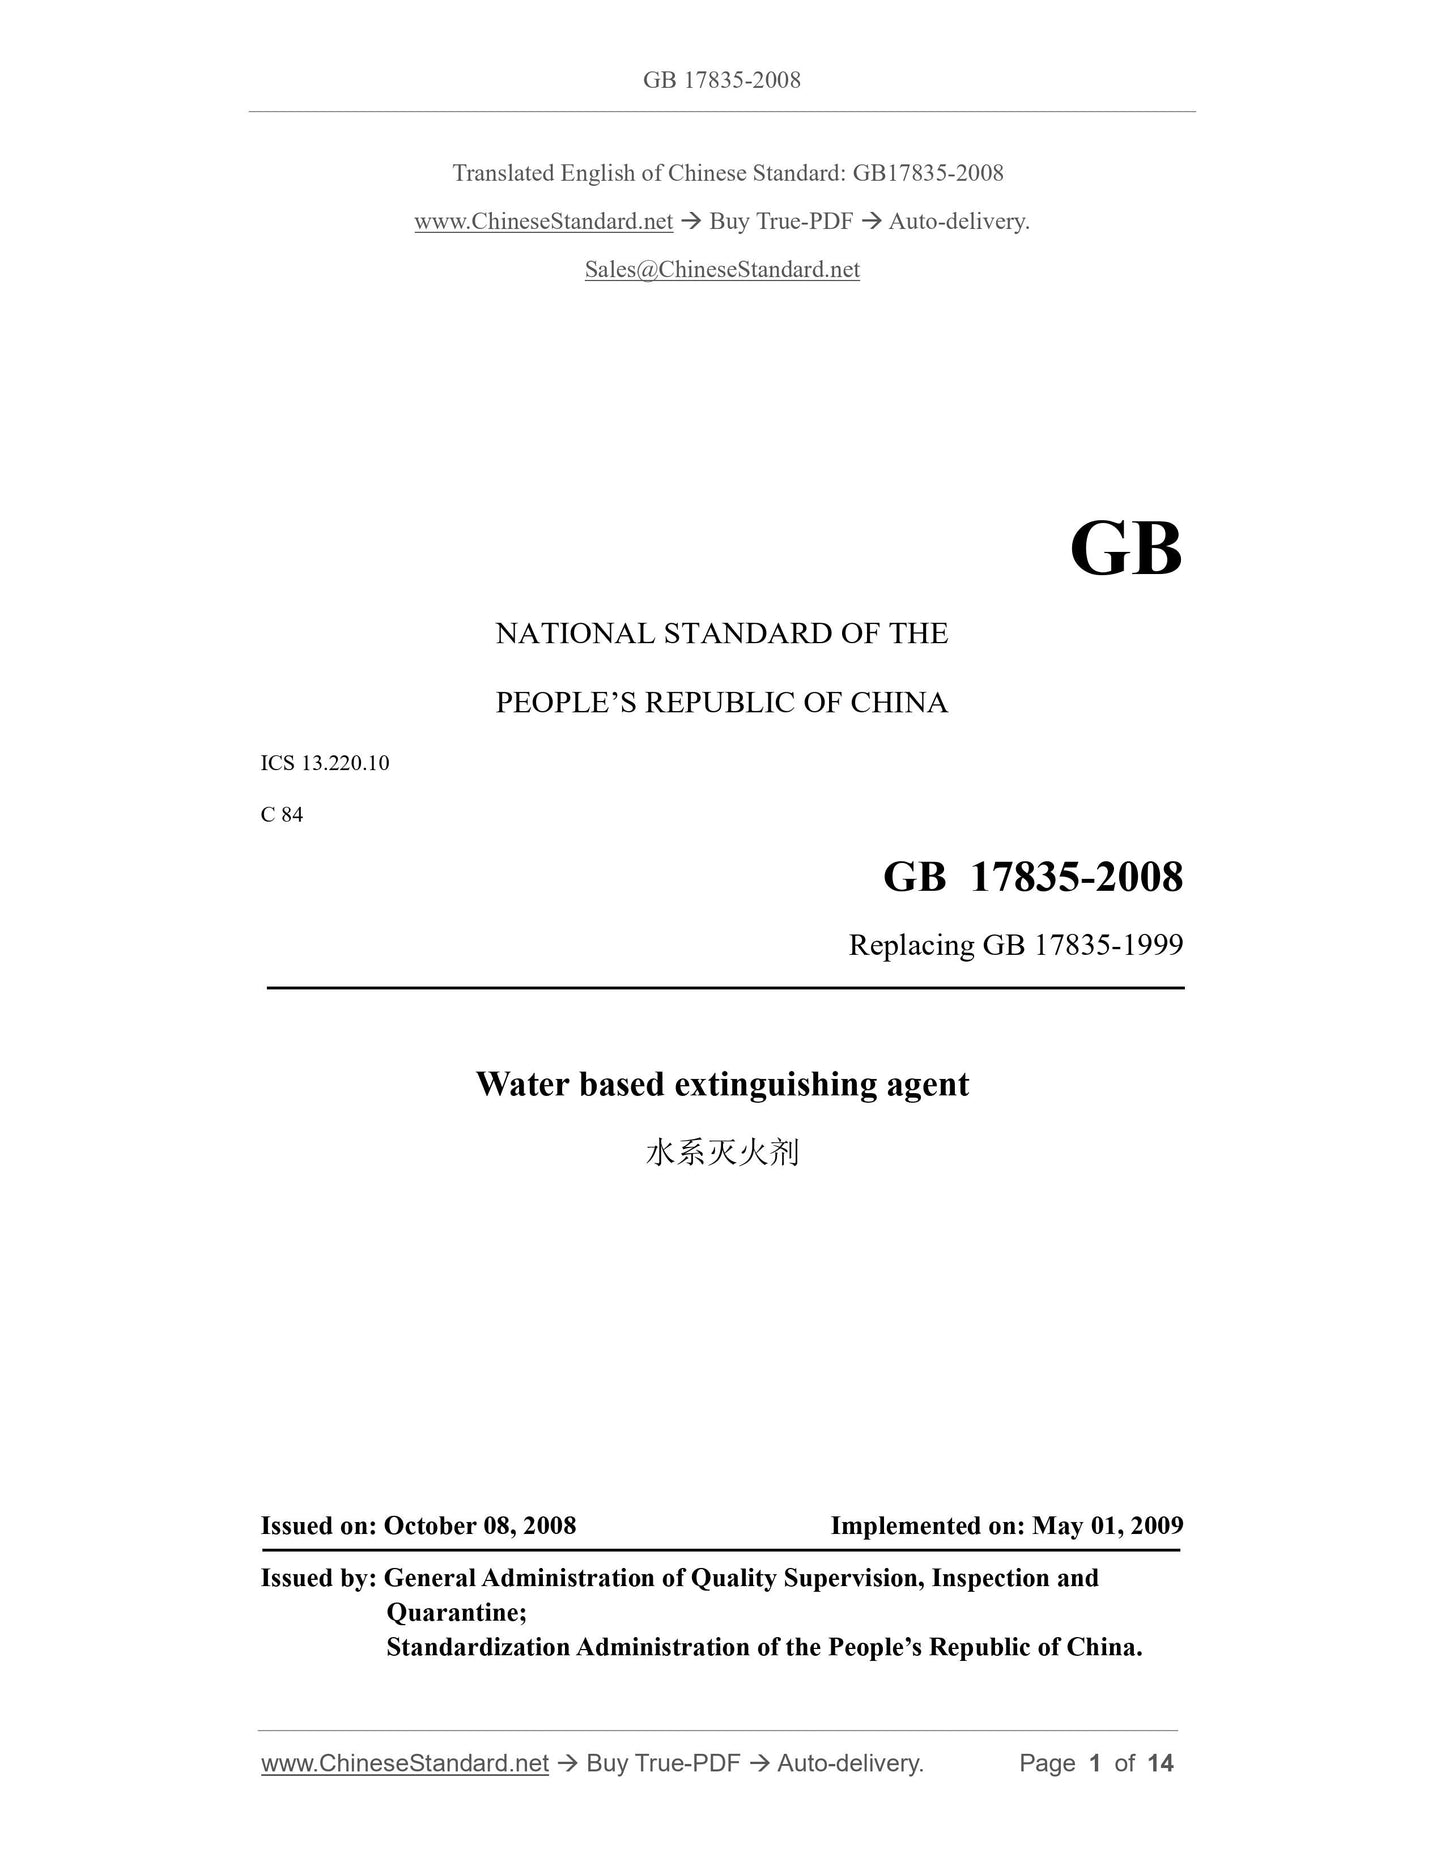 GB 17835-2008 Page 1